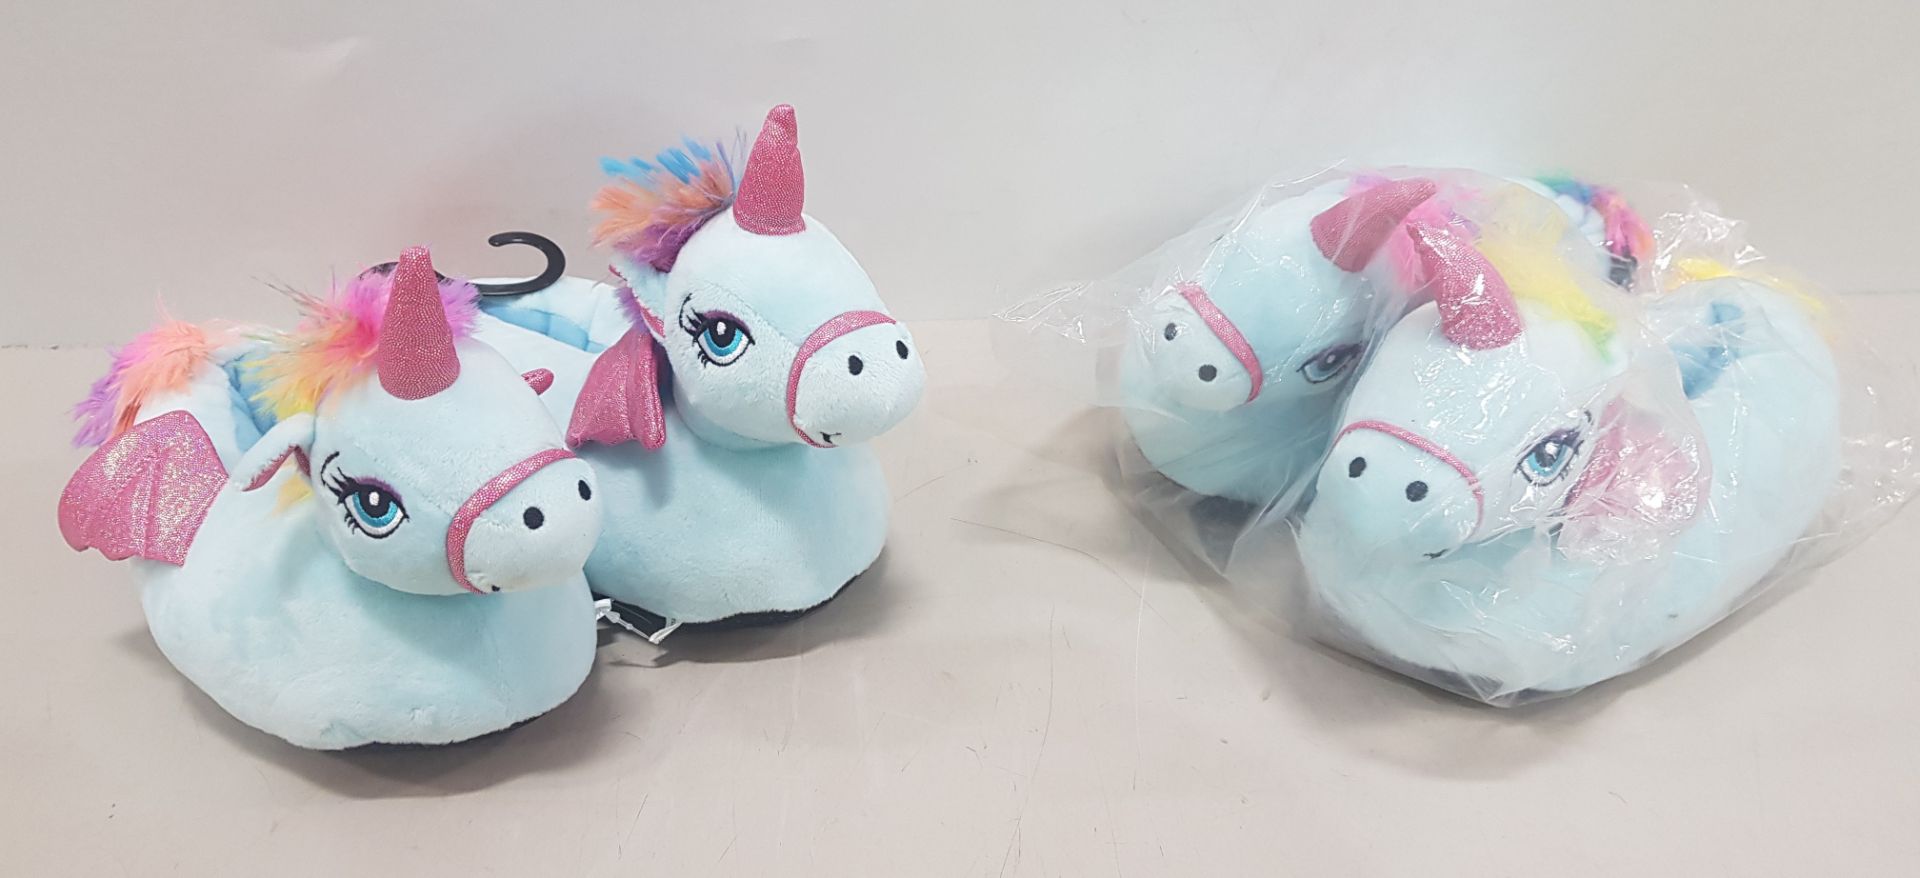 30 X BRAND NEW NIFTY KIDS UNICORN 3D SLIPPERS -ALL IN BLUE - ALL IN SIZE KIDS UK 2-3 - IN 1 TRAY